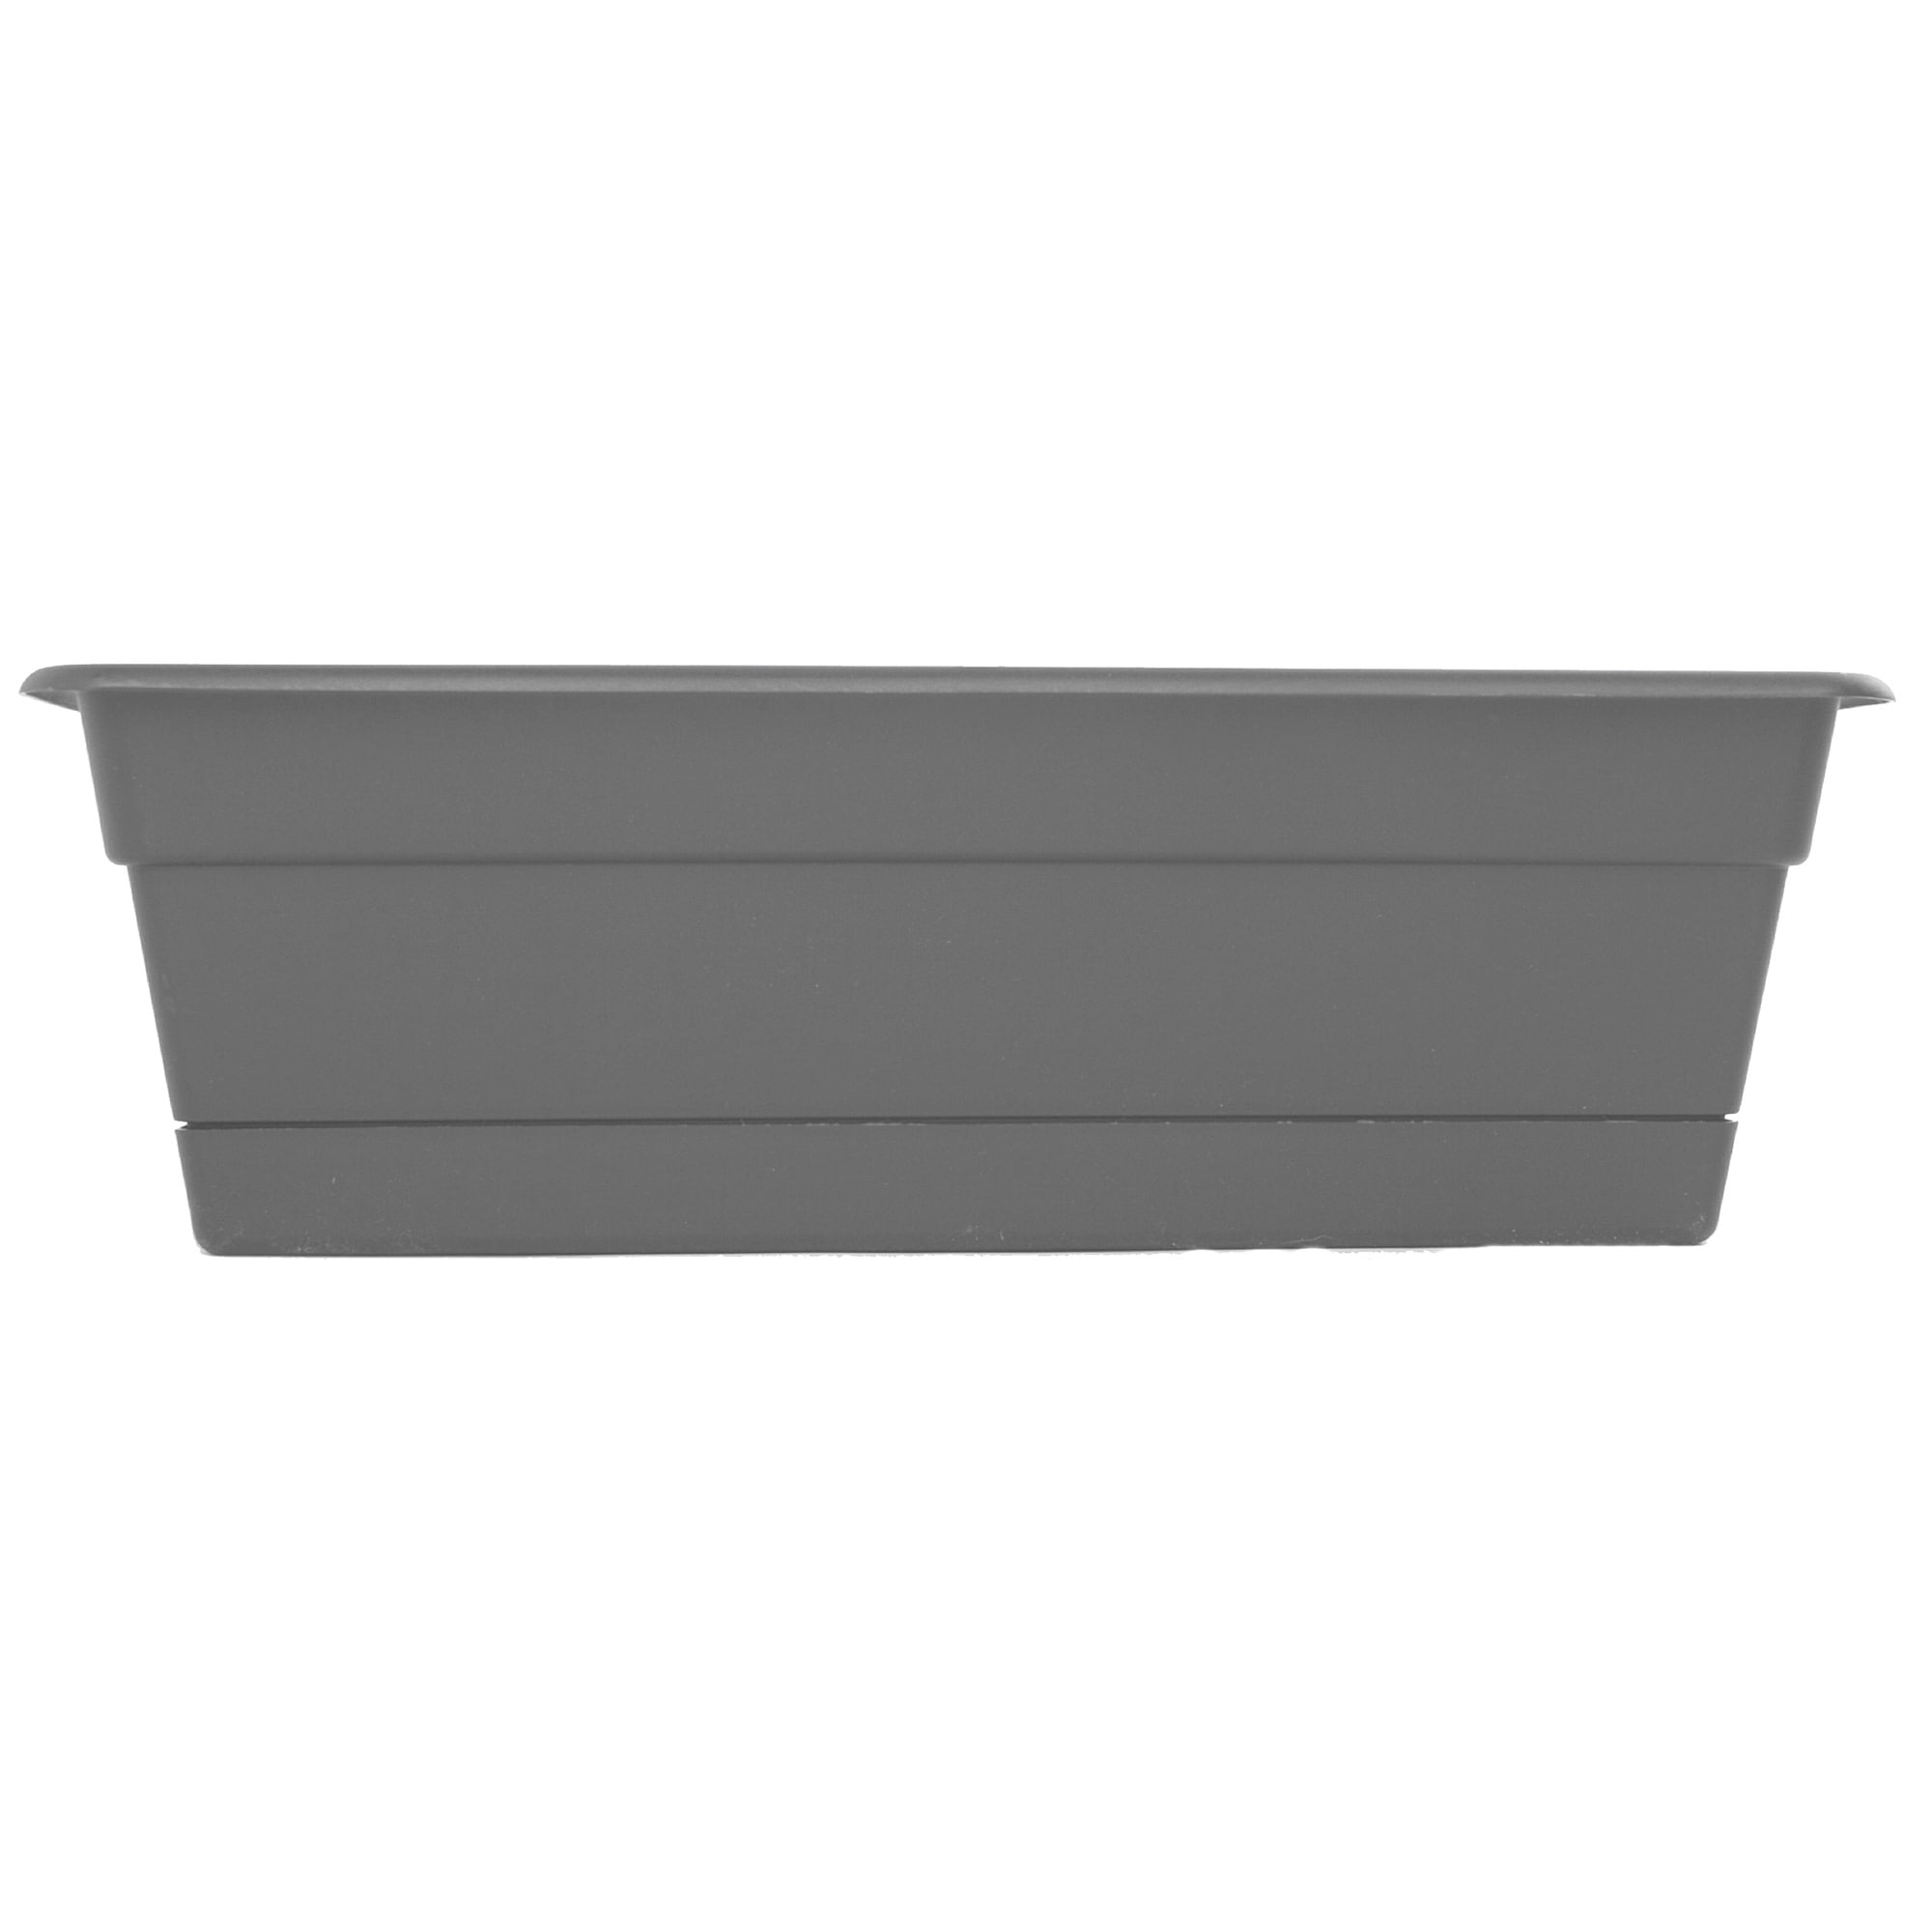 Dcbt18-908 18 In. Dura Cotta Window Box Planter With Tray, Charcoal